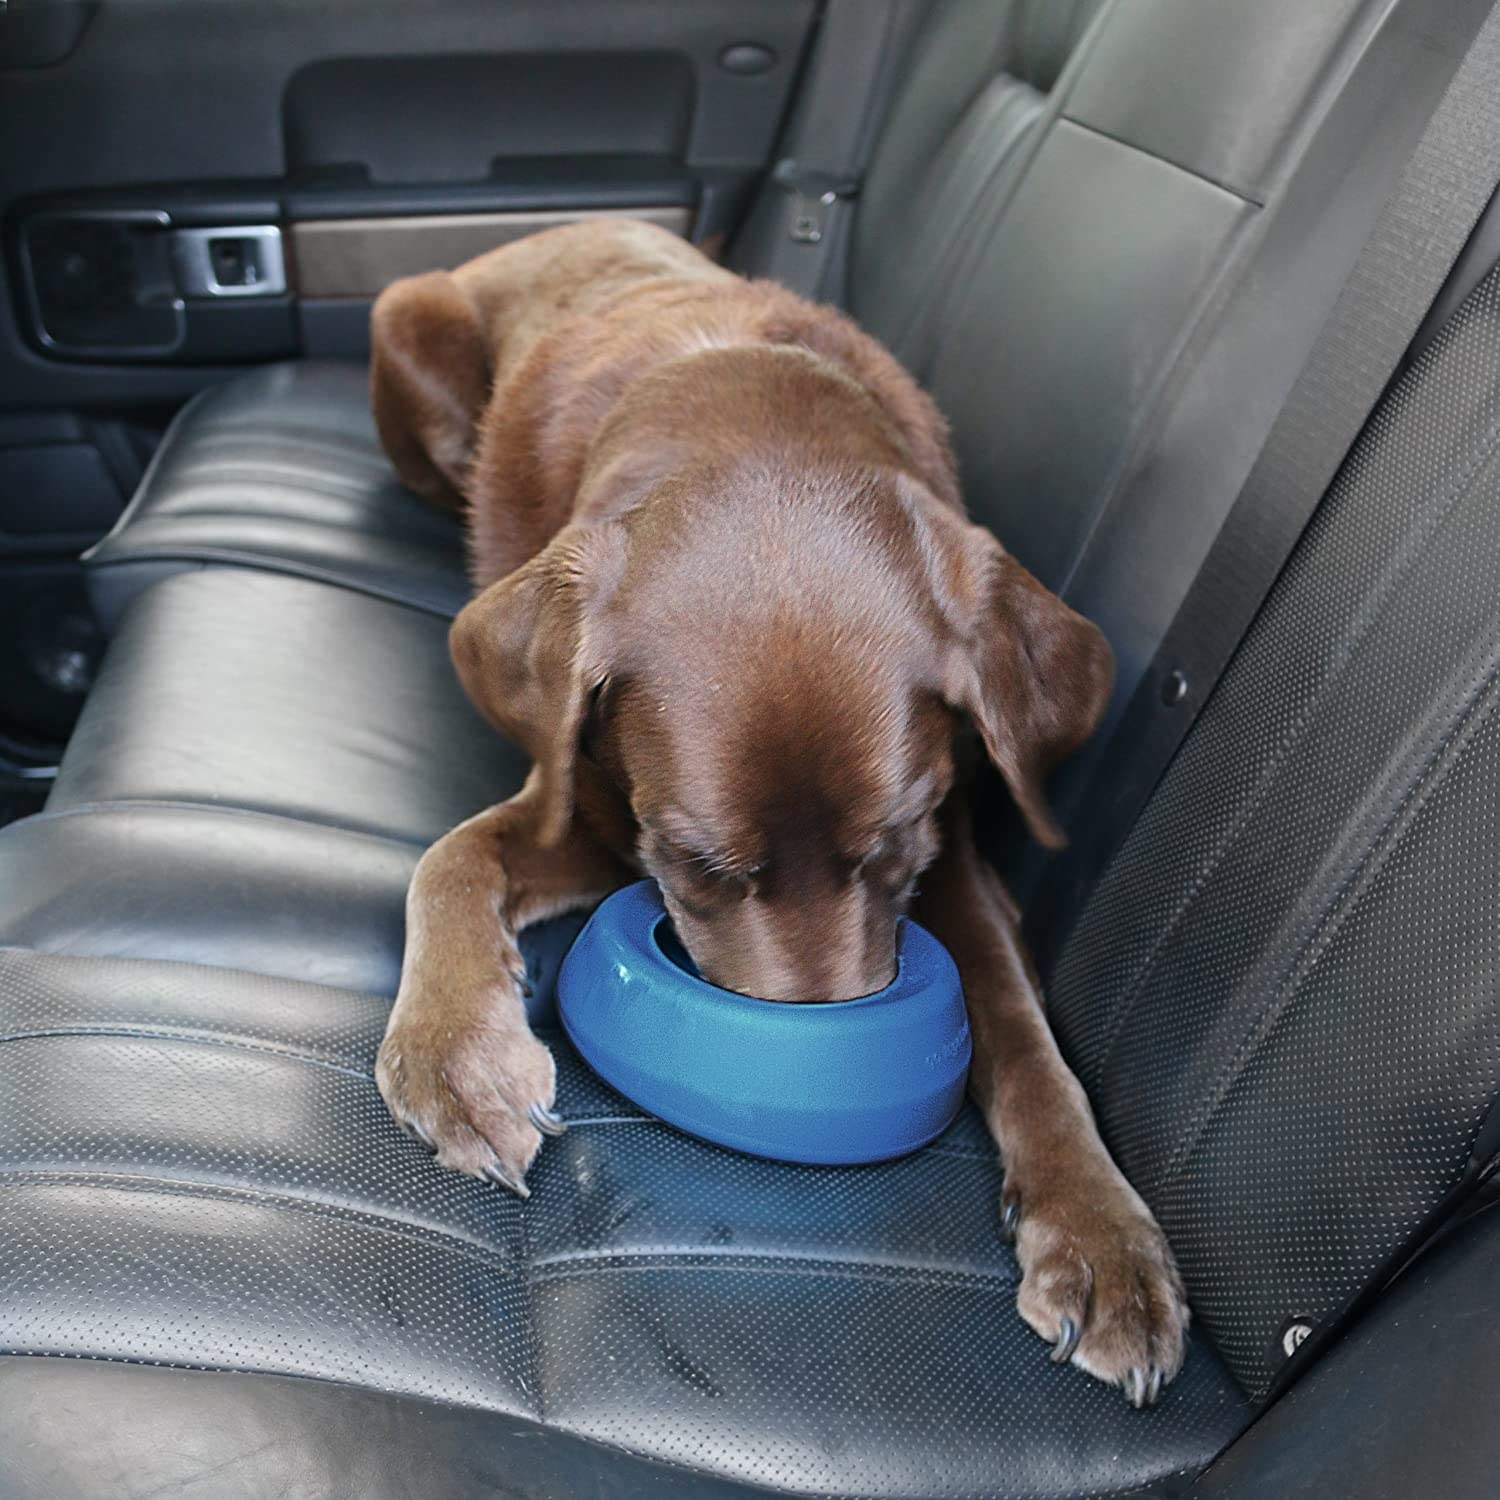 Dog drinking out of the blue while while in the back seat